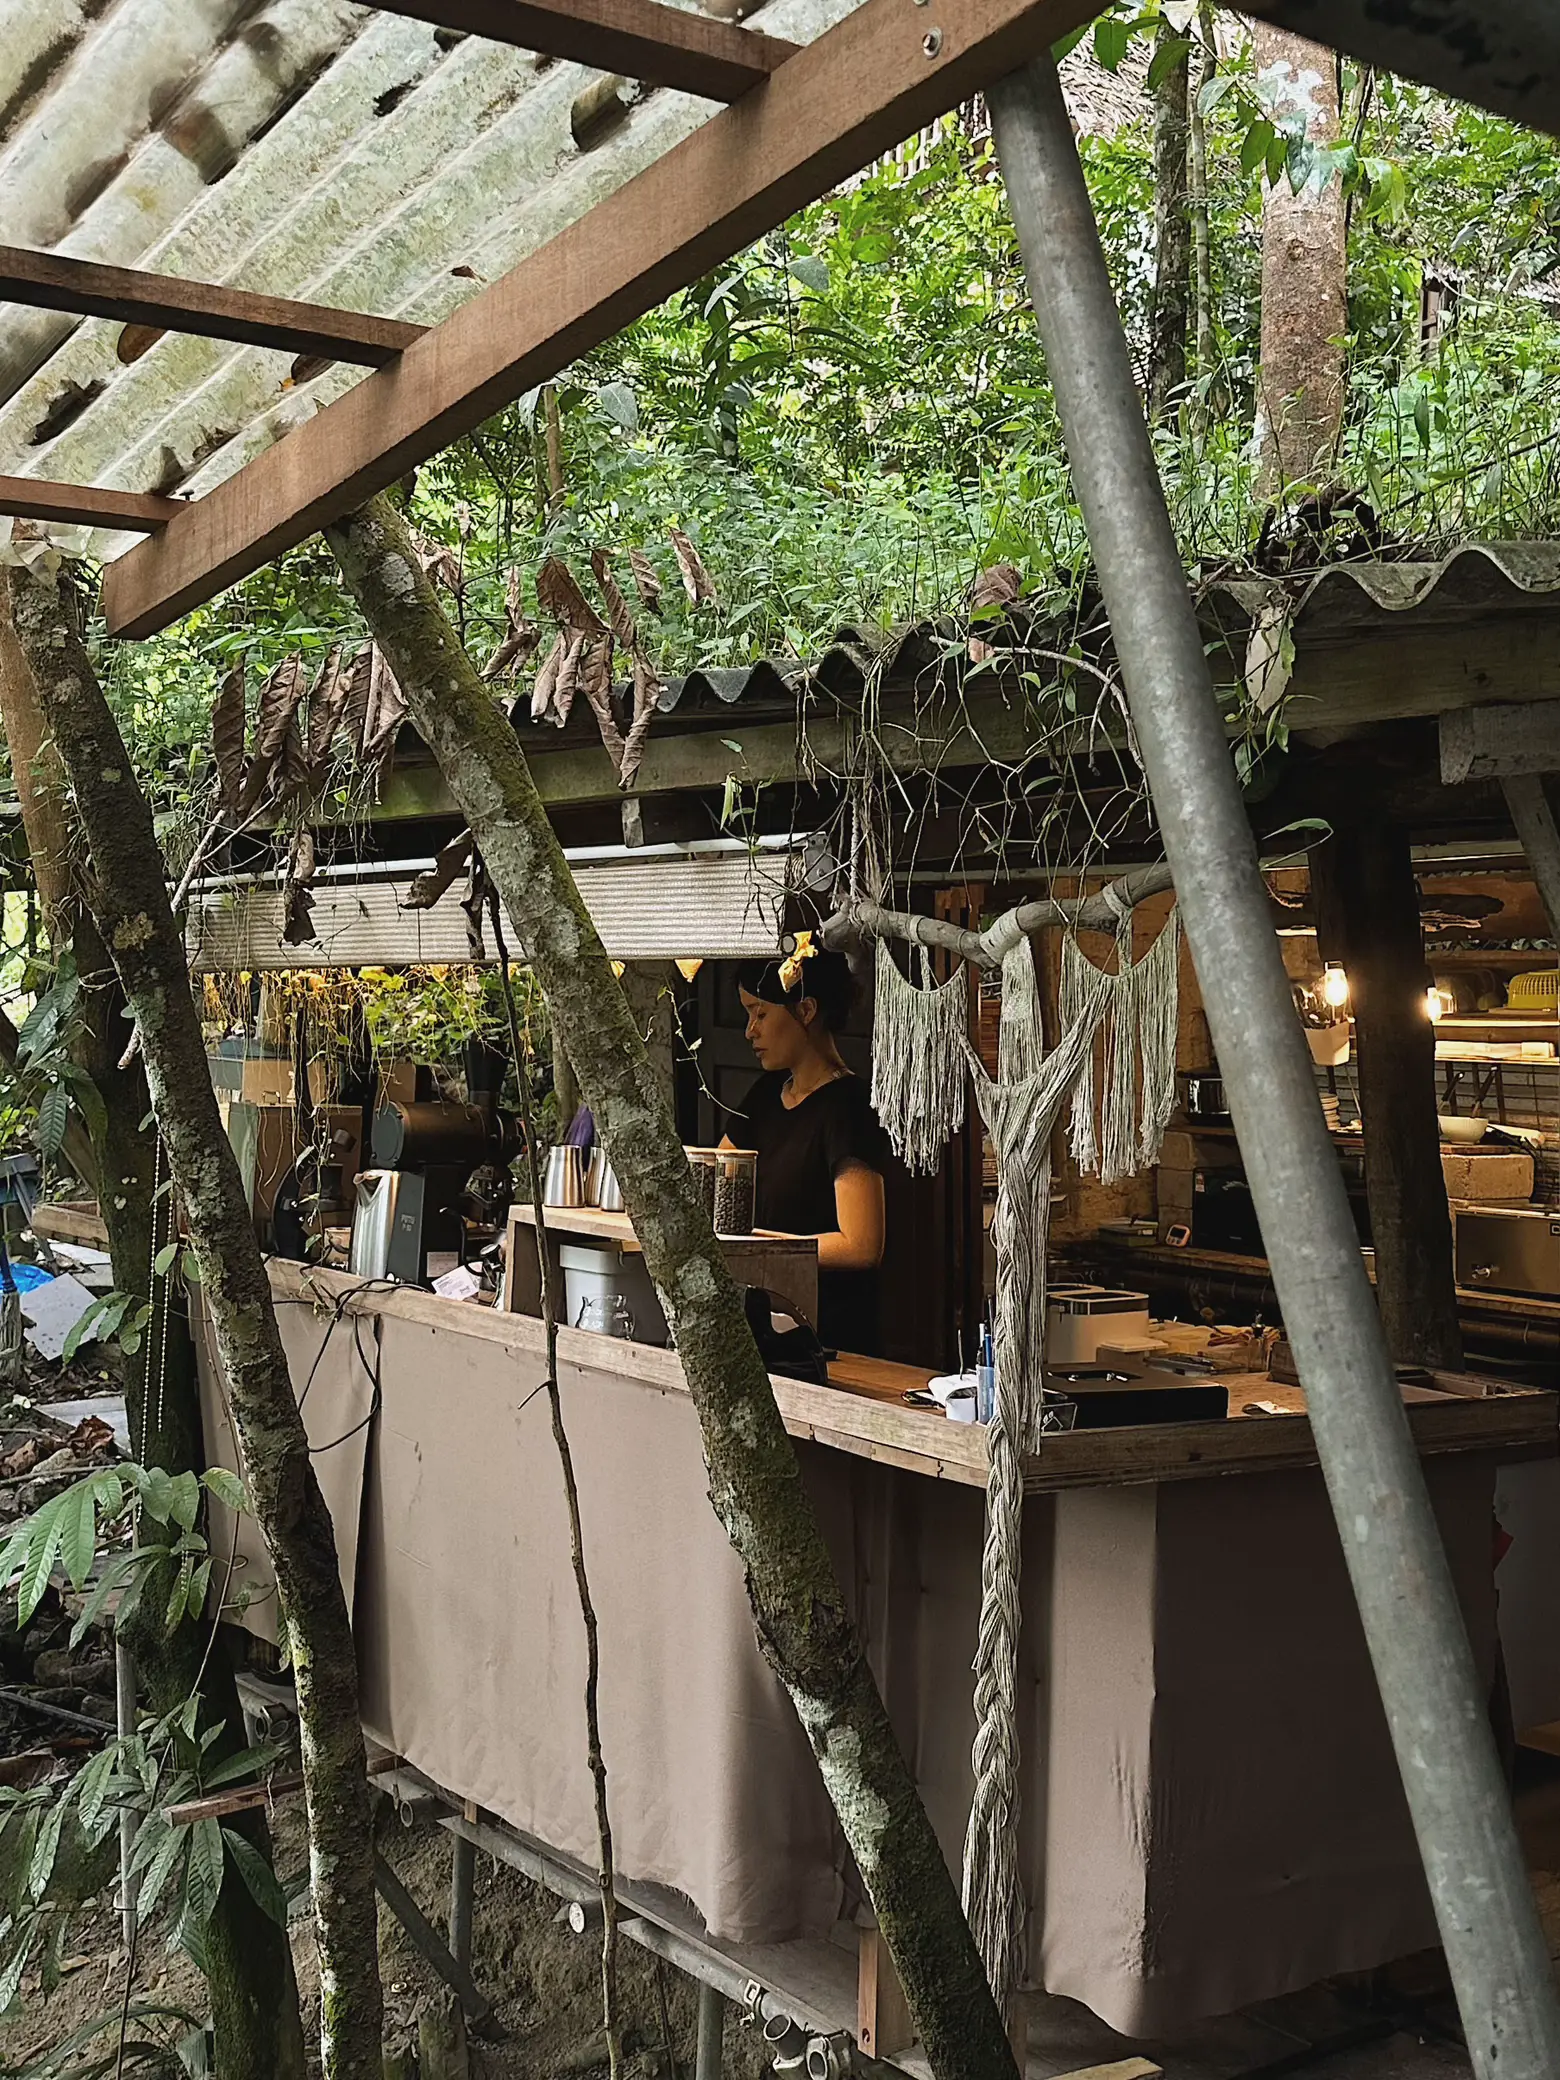 50mins from SG, a Treehouse Cafe in the Rainforest's images(2)